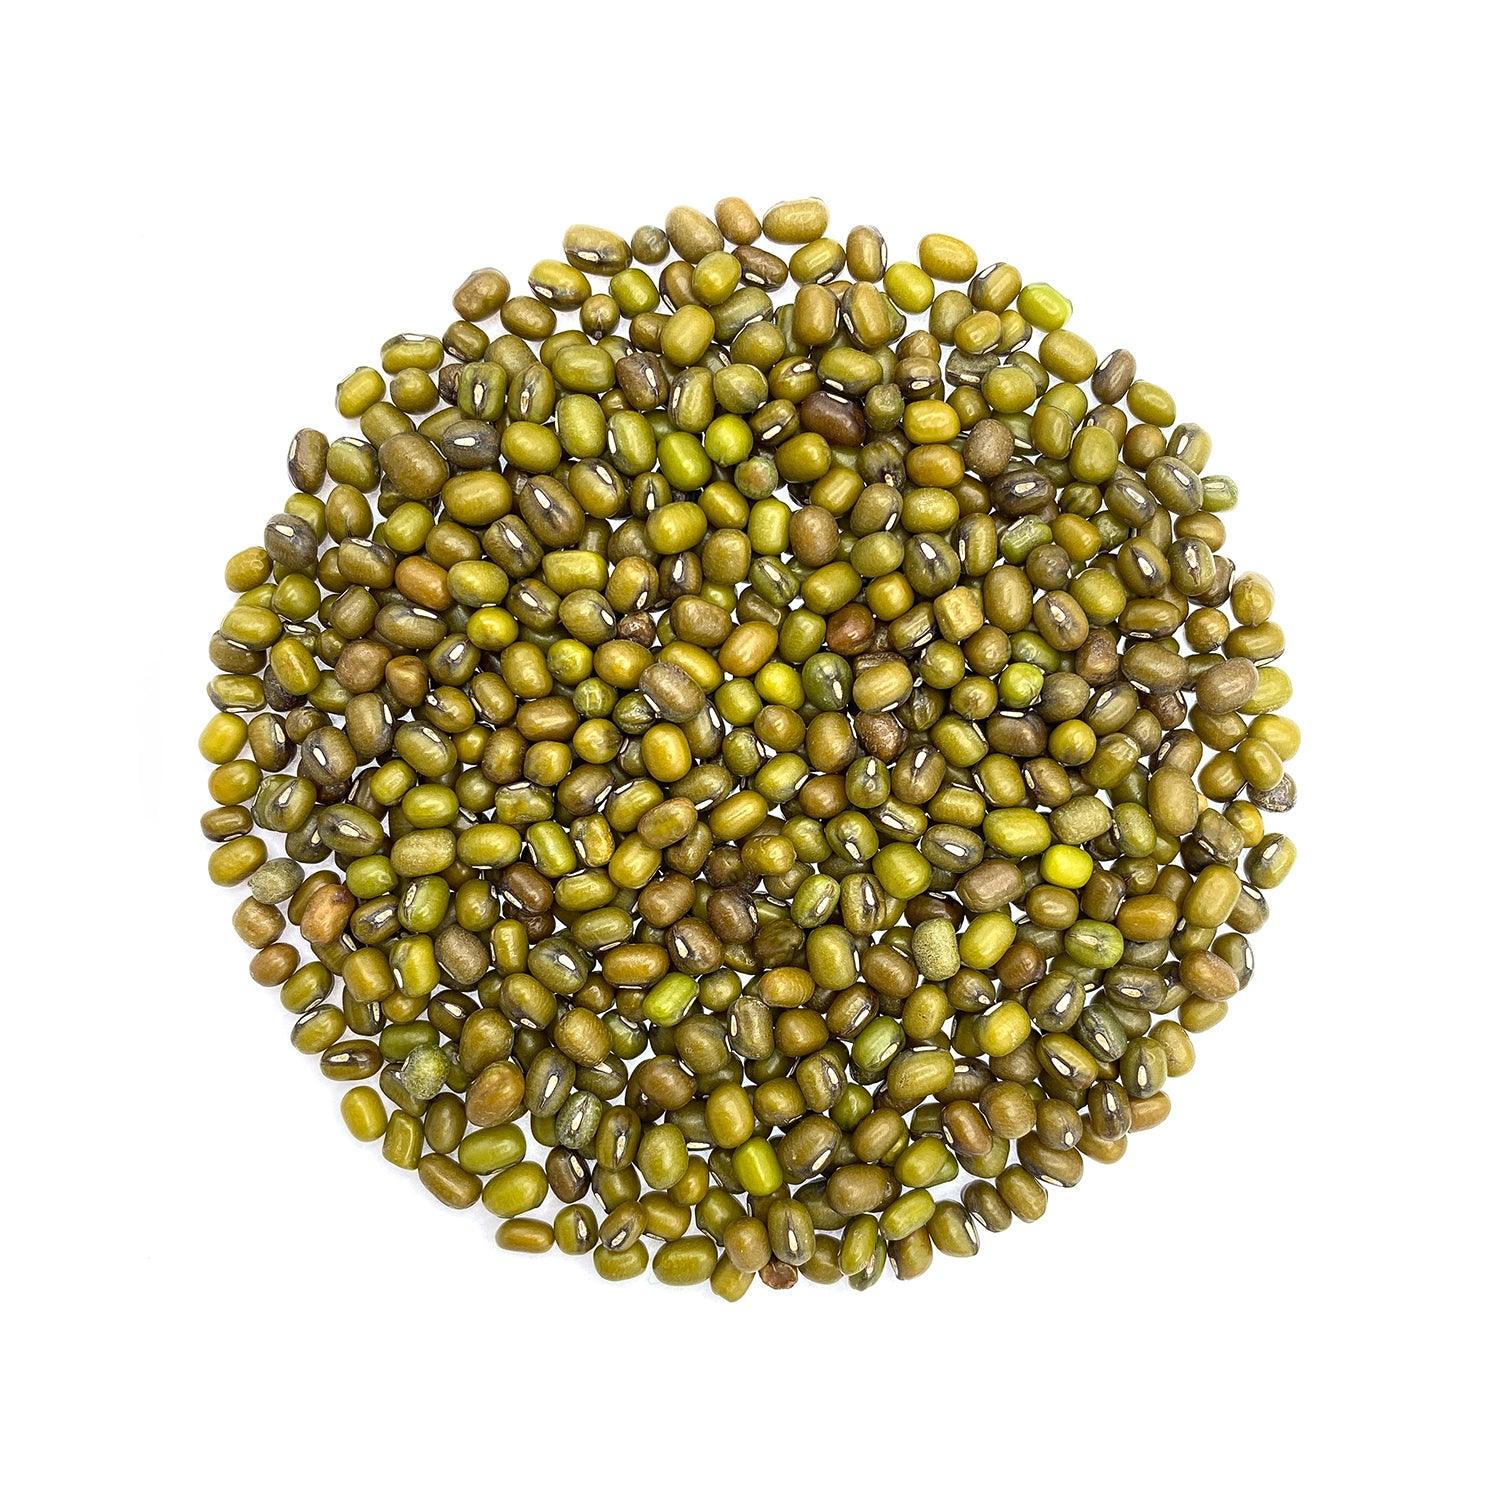 Moong Dal Sabut - Green Gram Whole 800g - Finest Quality, Organic, Raw, Unpolished & Wholesome - No Preservatives - Satopradhan